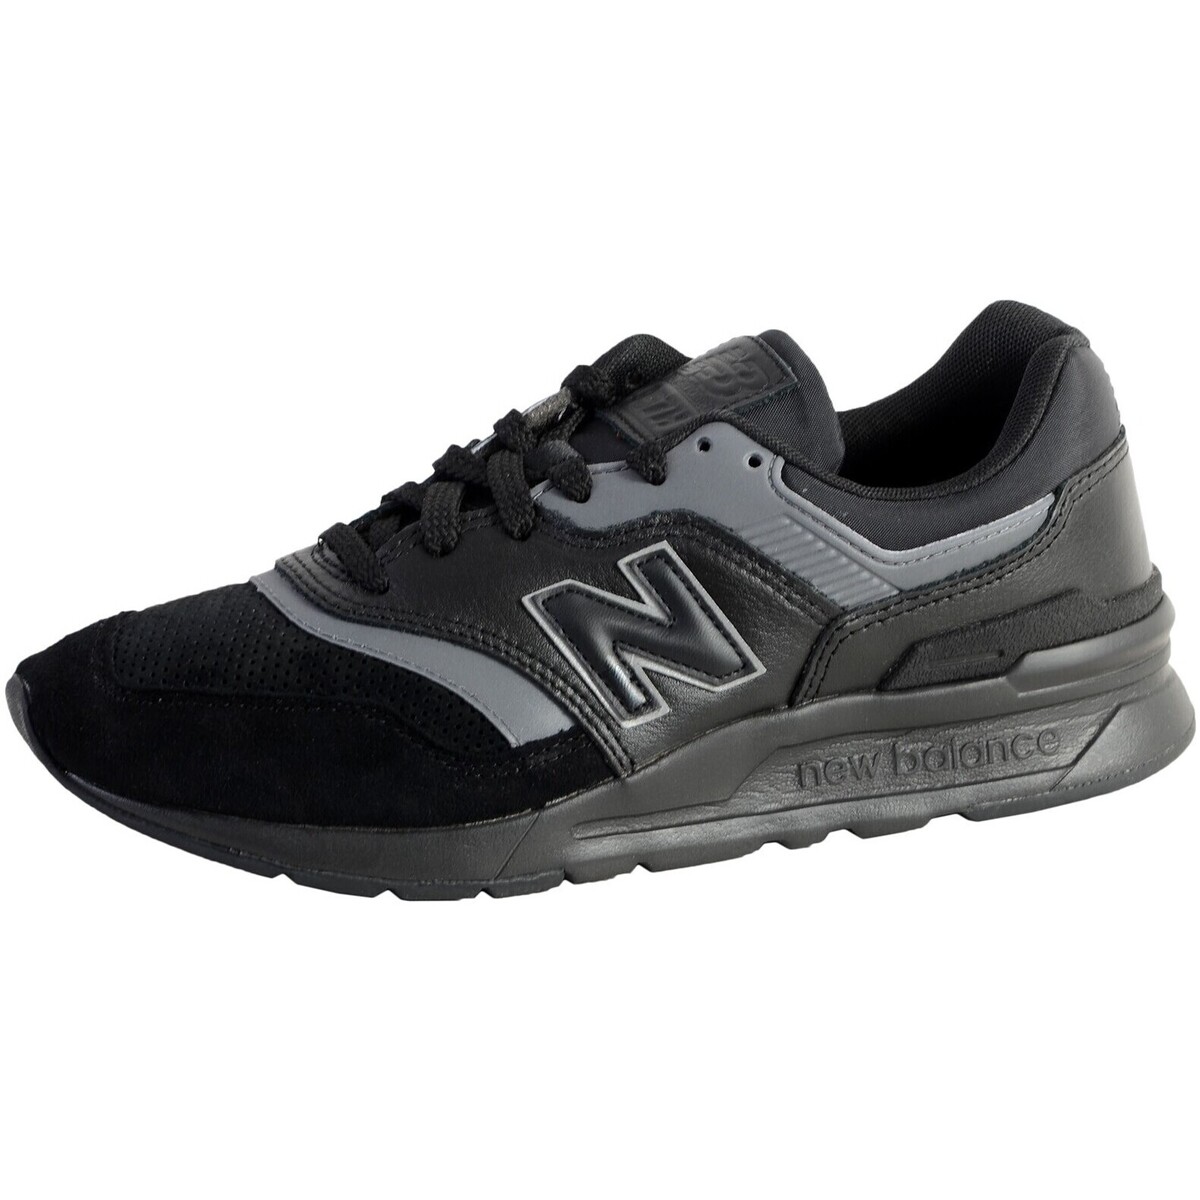 Sneakers New Balance 130181